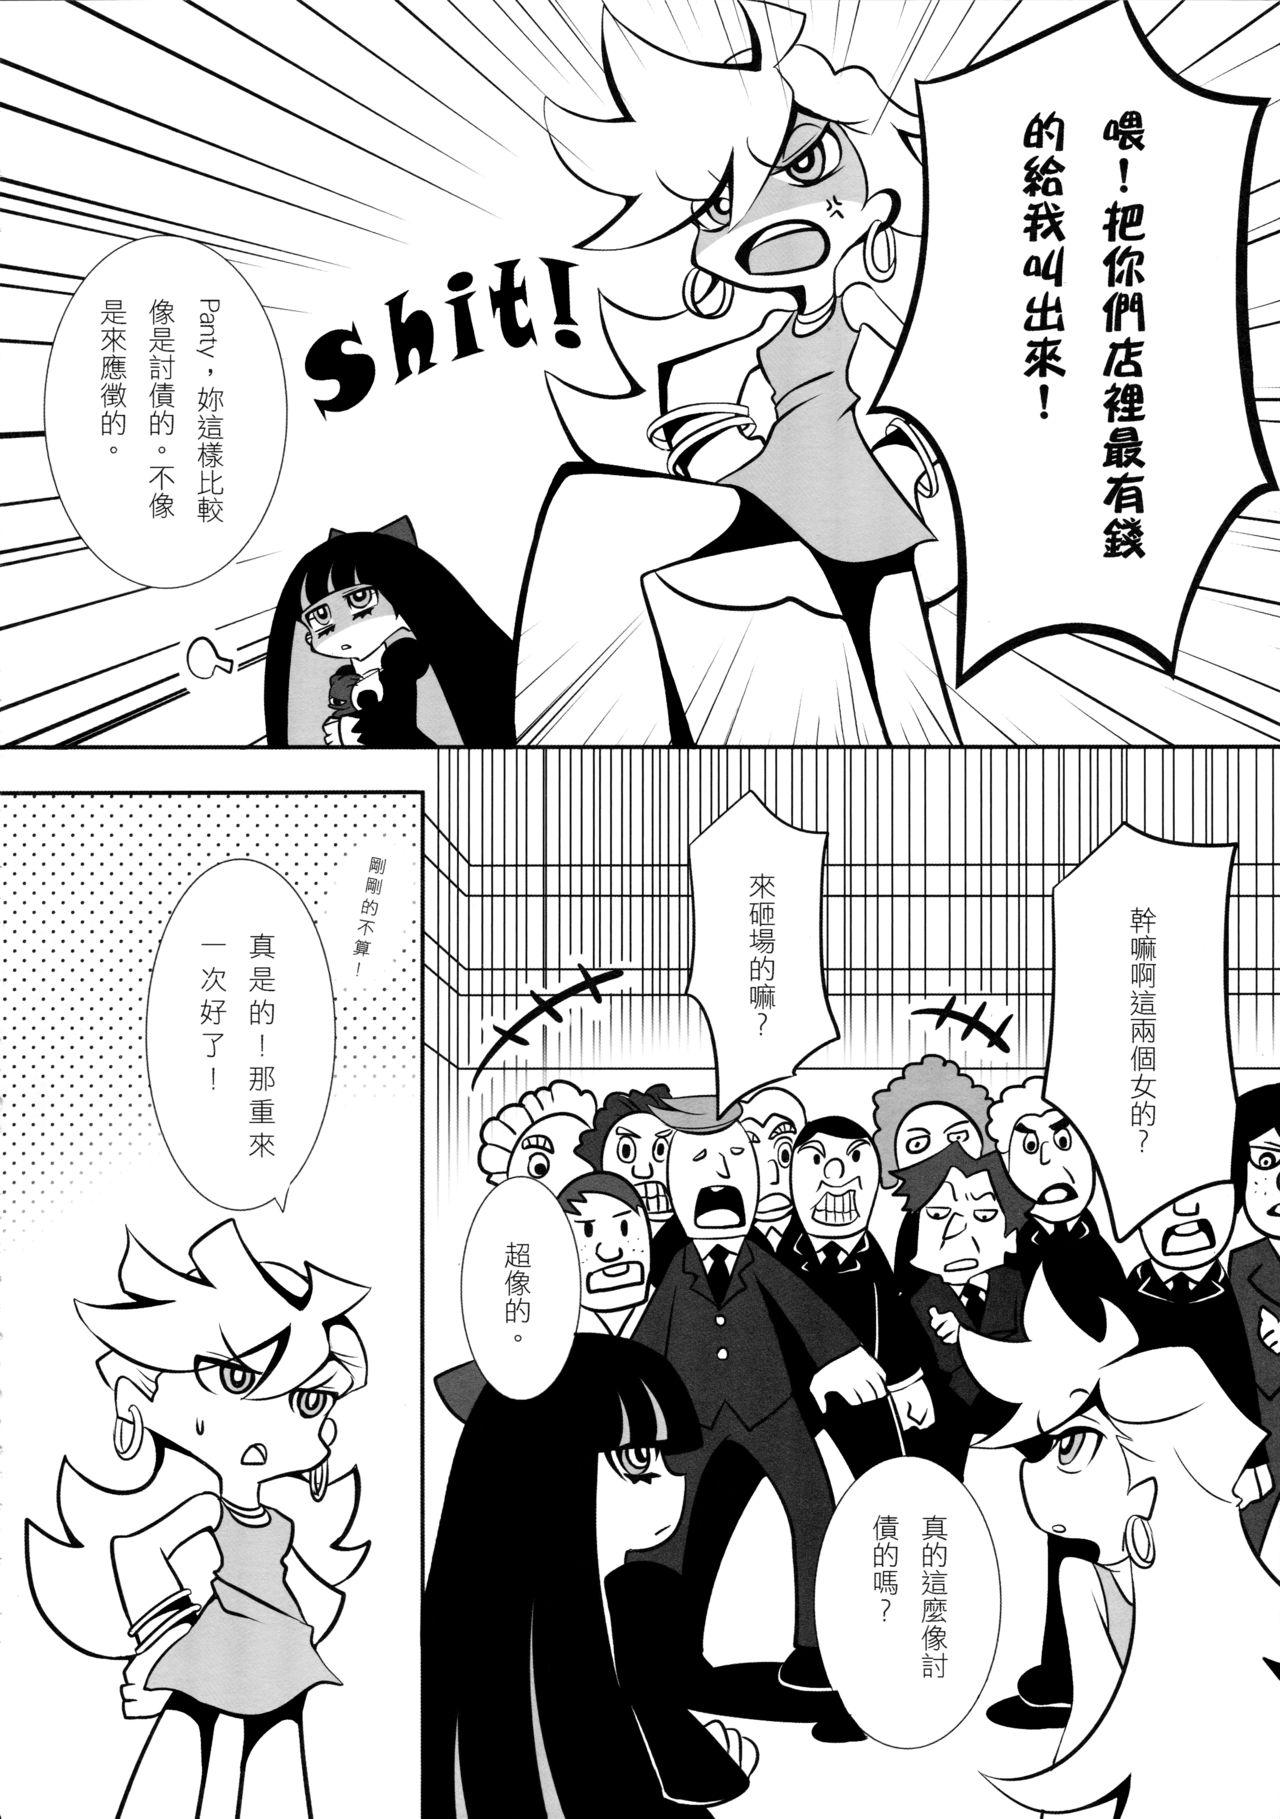 Chubby Angel Bitches! - Panty and stocking with garterbelt Korea - Page 6